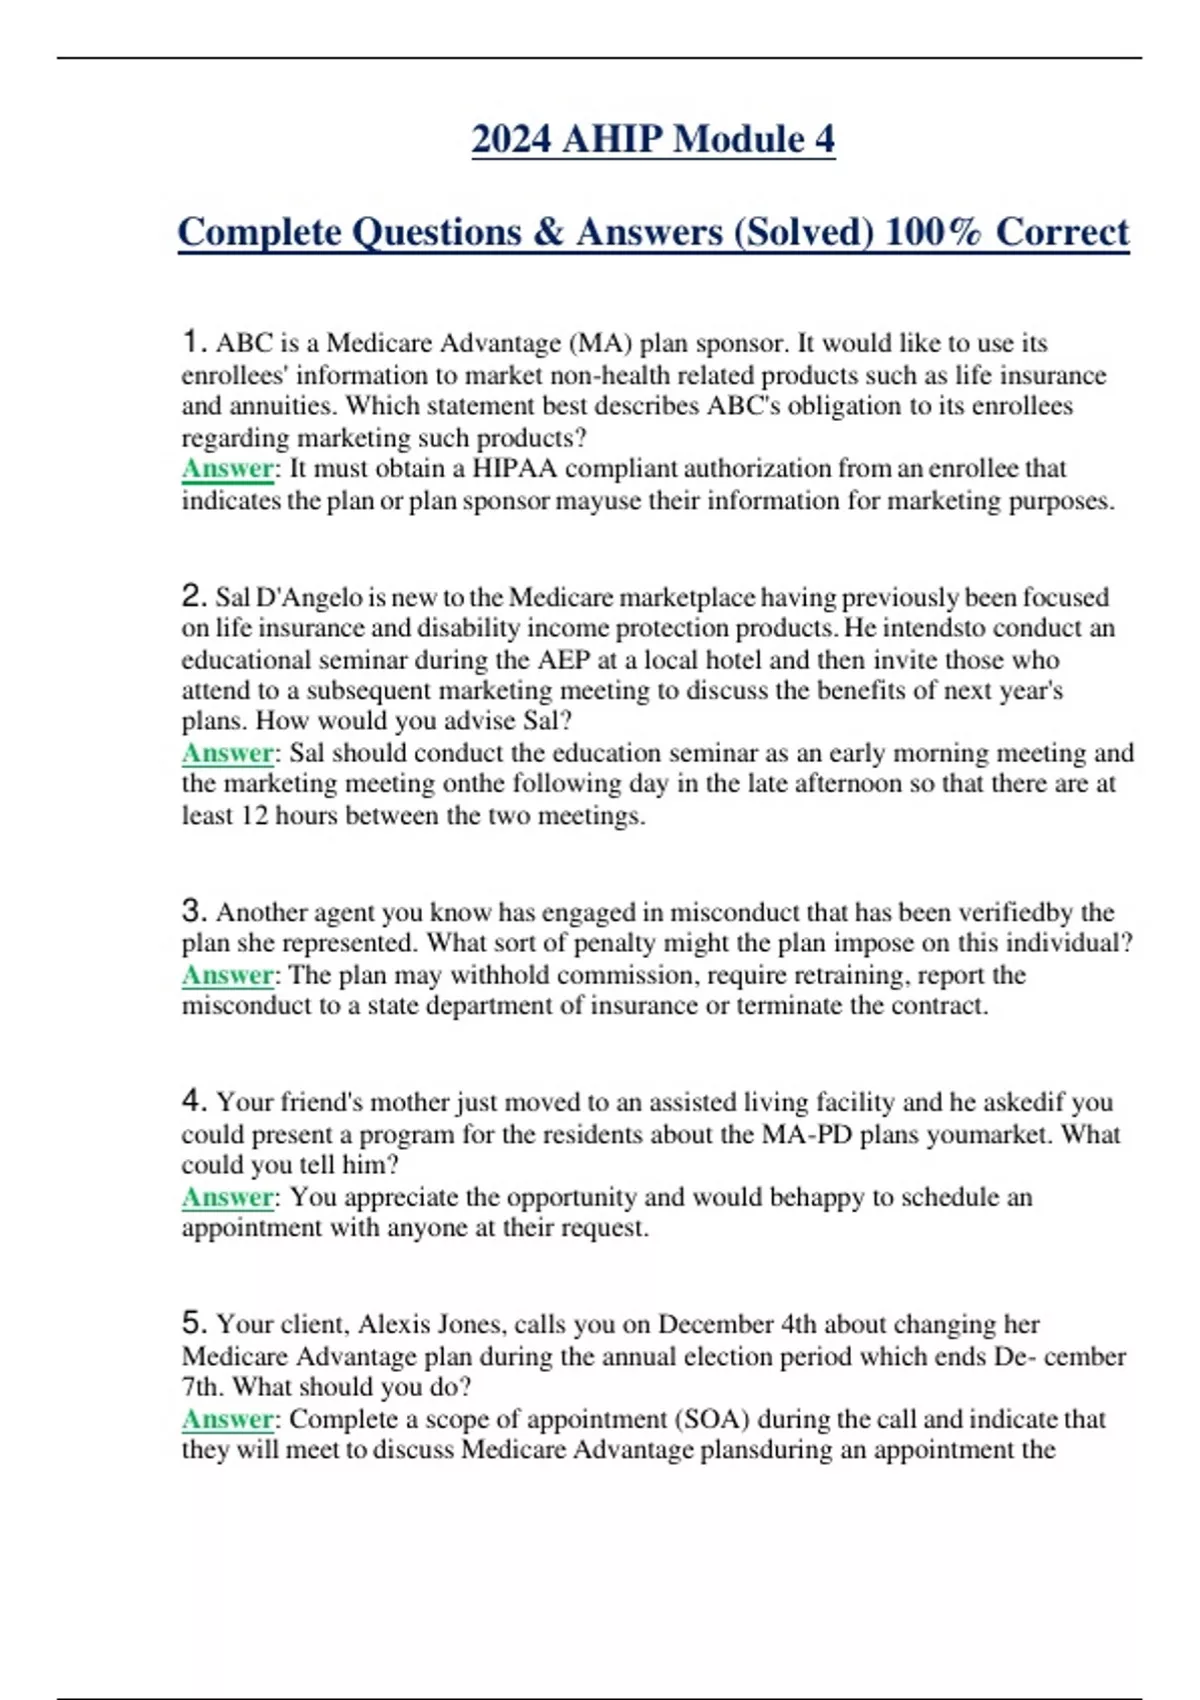 2024 AHIP Module 4 Complete Questions & Answers (Solved) 100 Correct